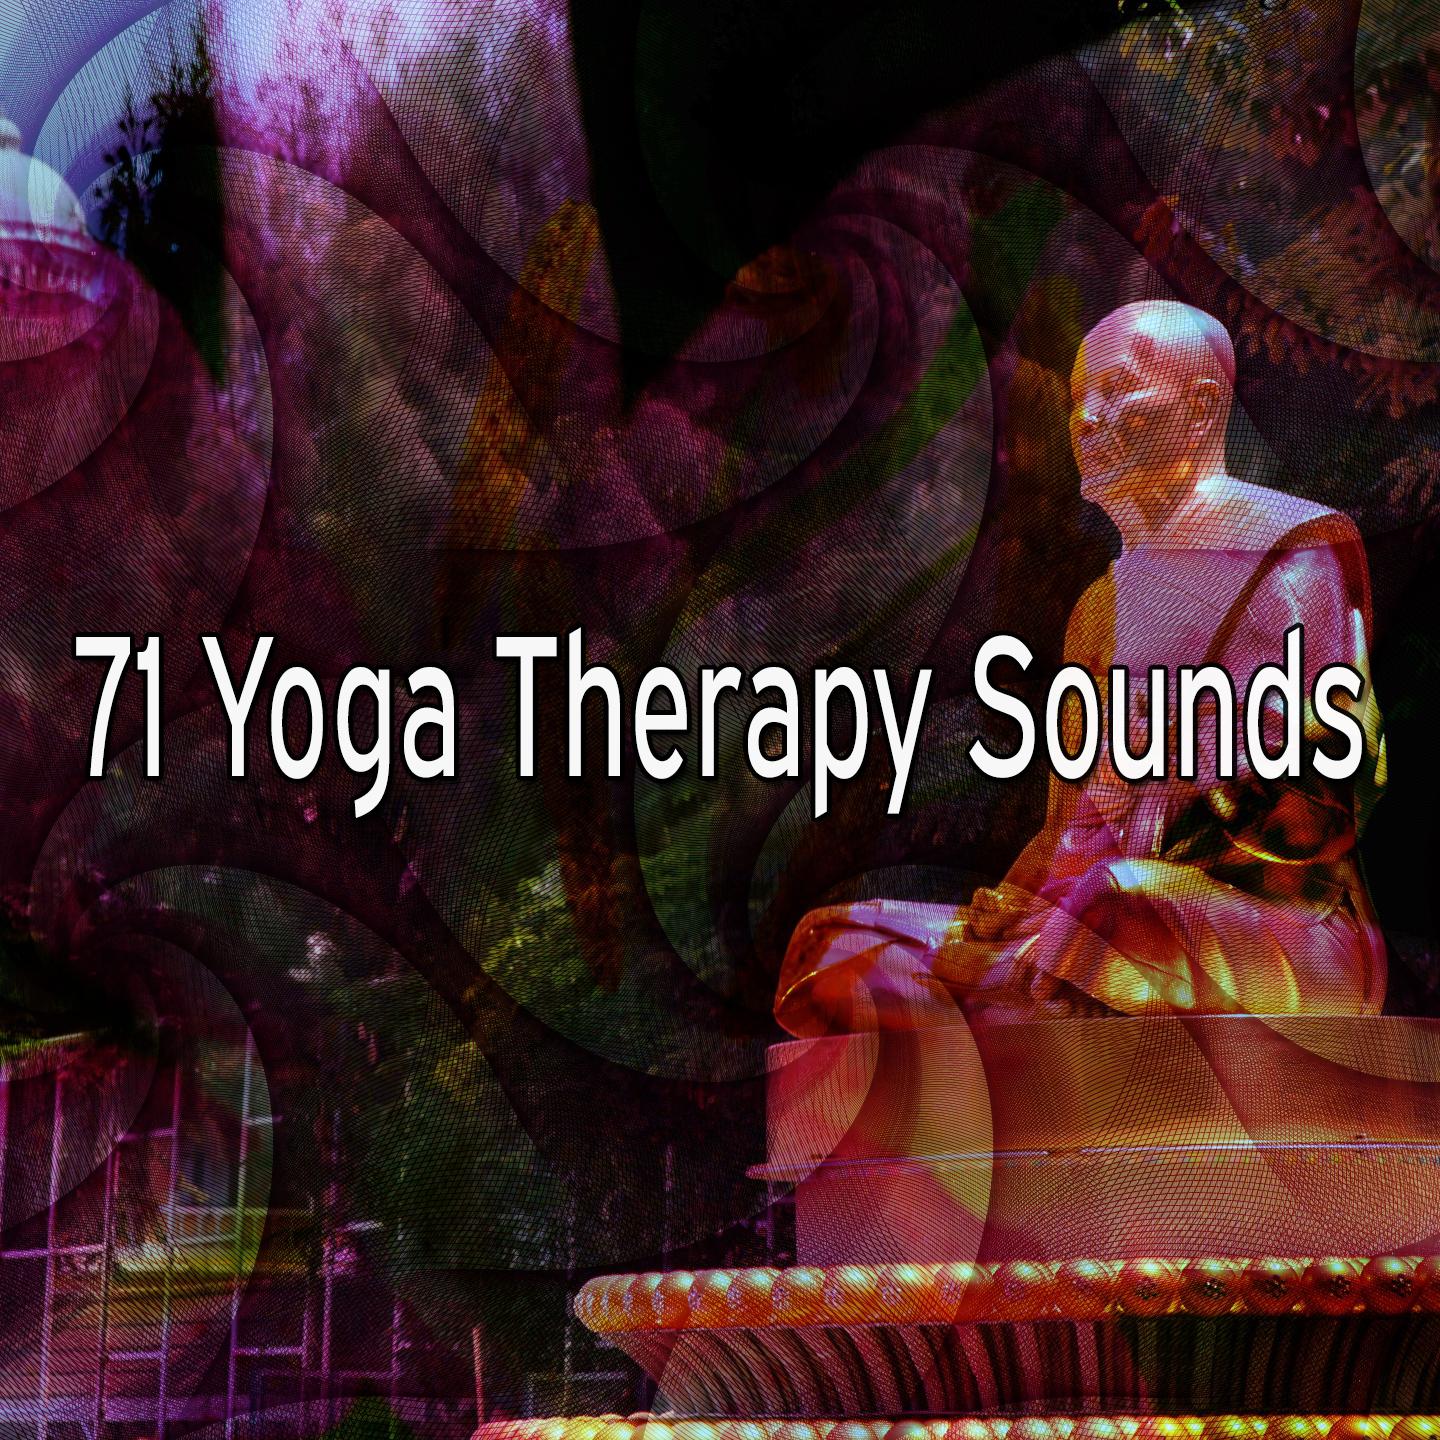 71 Yoga Therapy Sounds